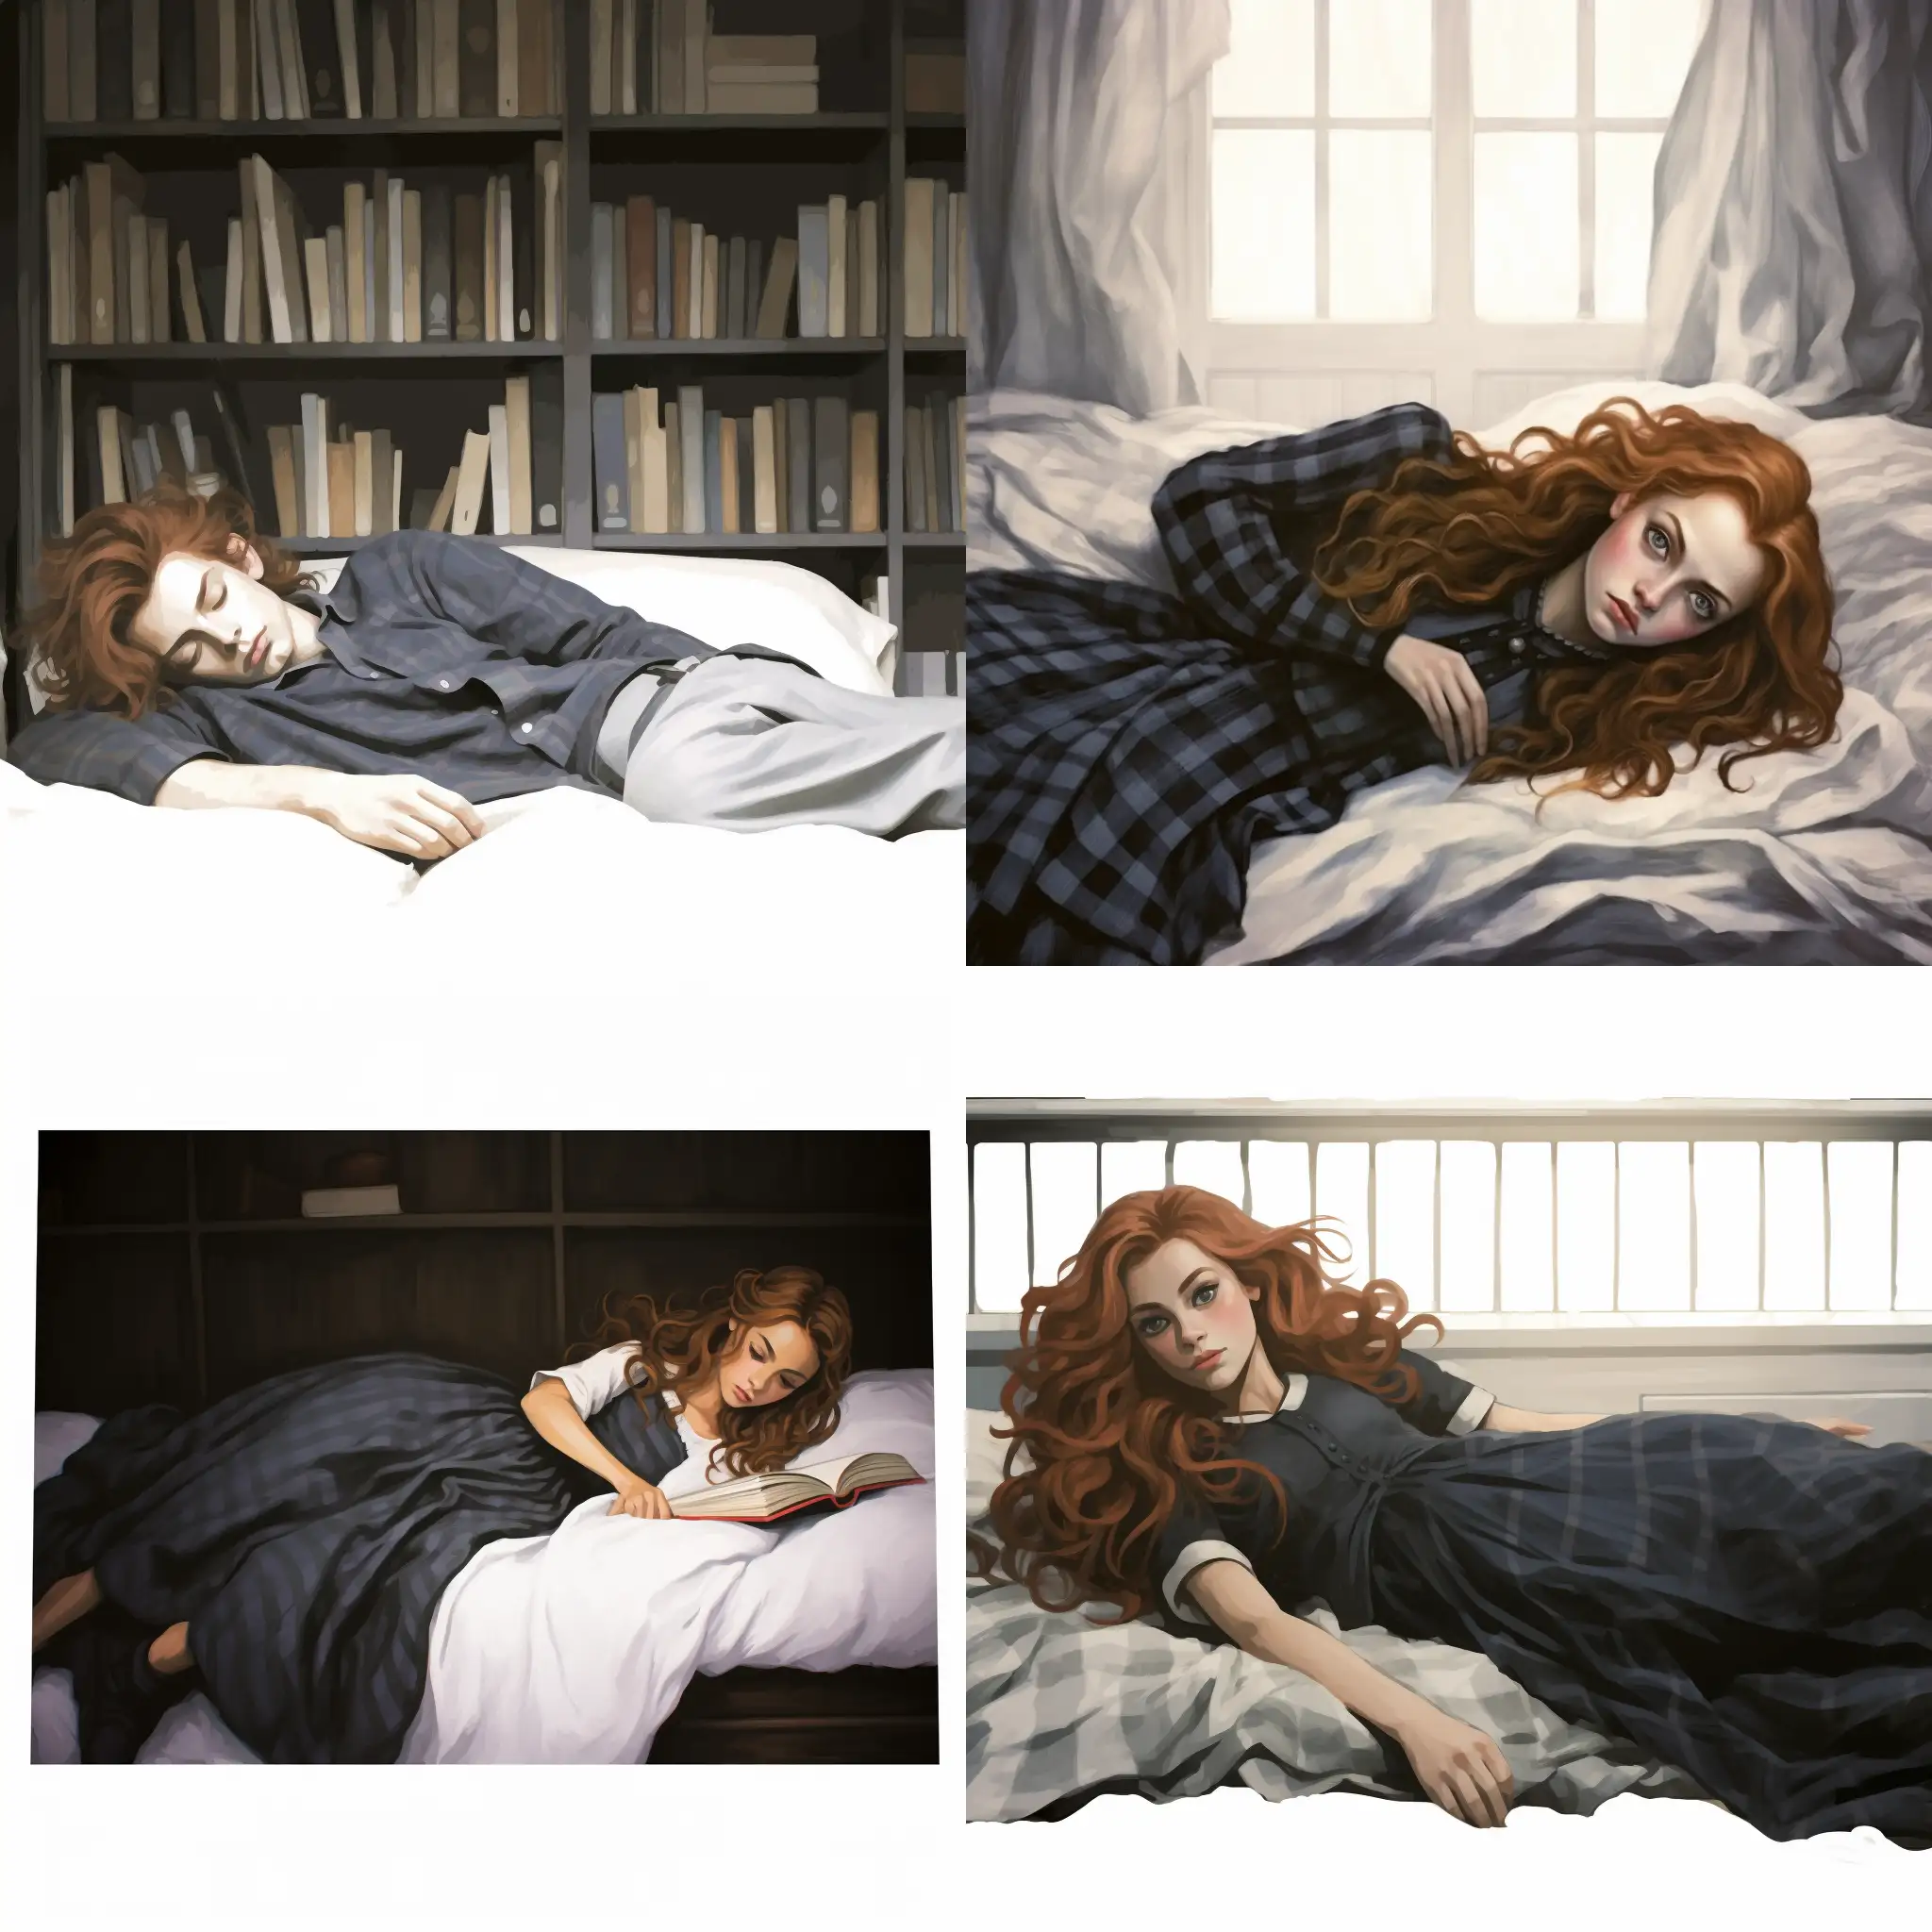 hermione lying on soft bed in dorm with black stocking